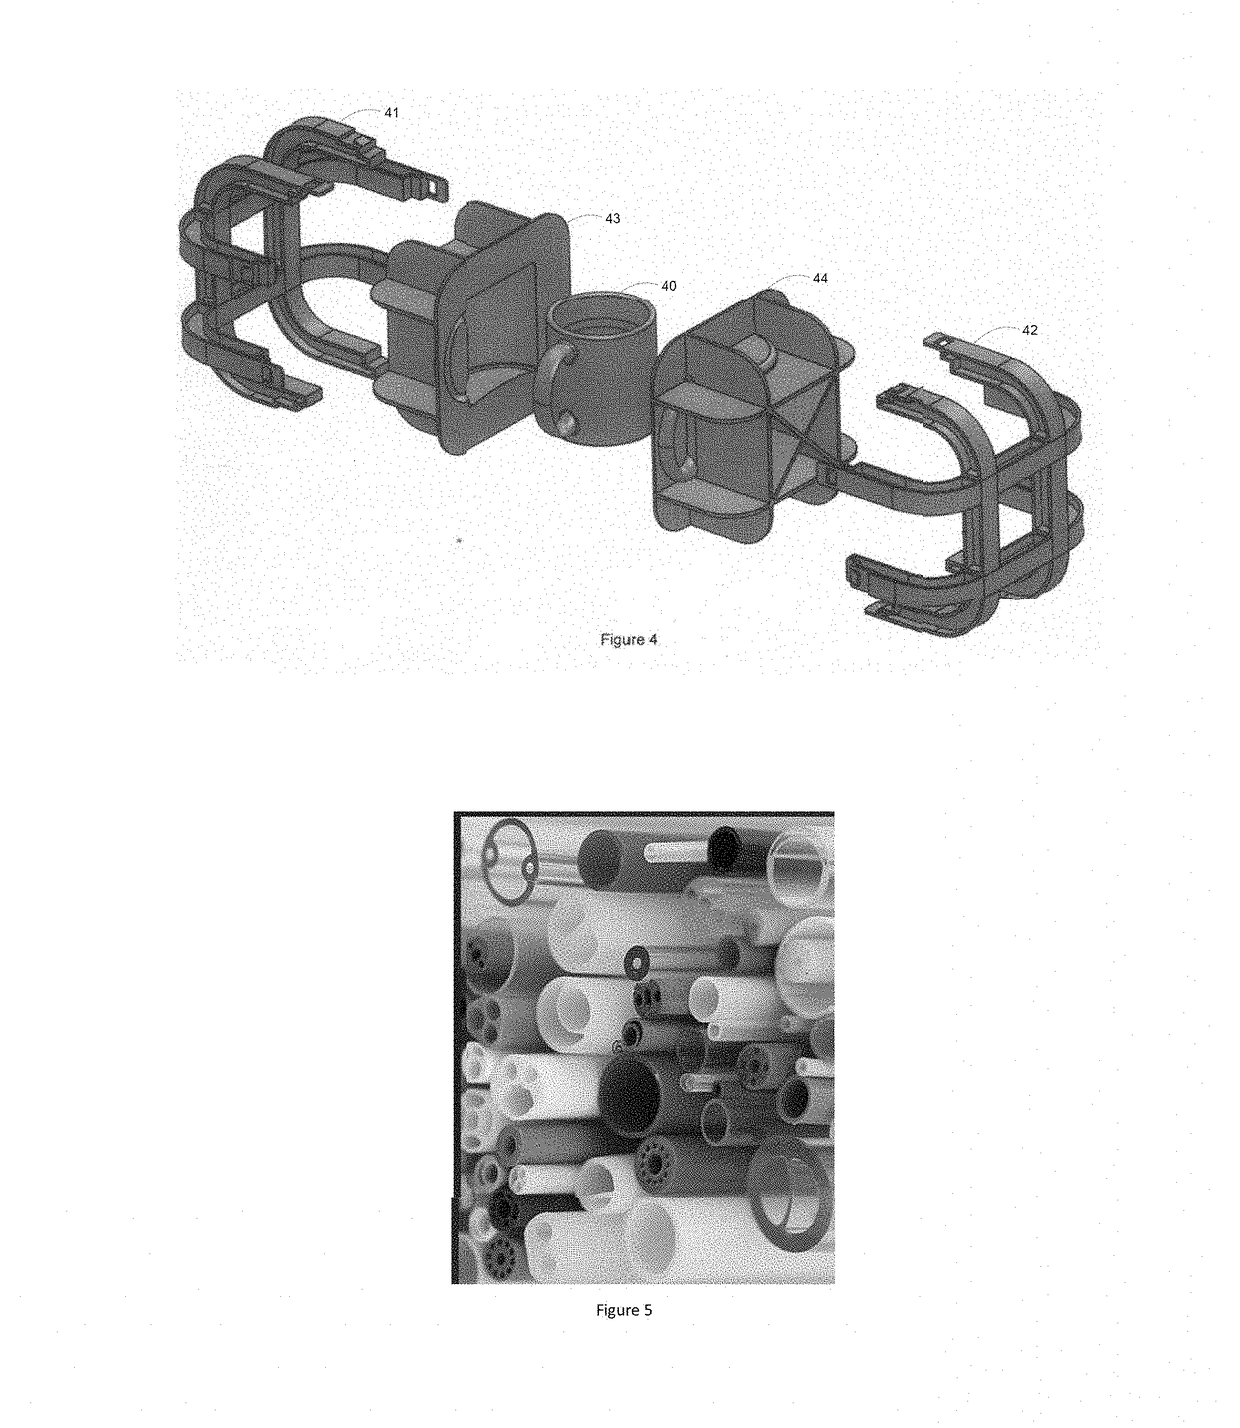 System and method for packaging items for shipping using additive manufacturing